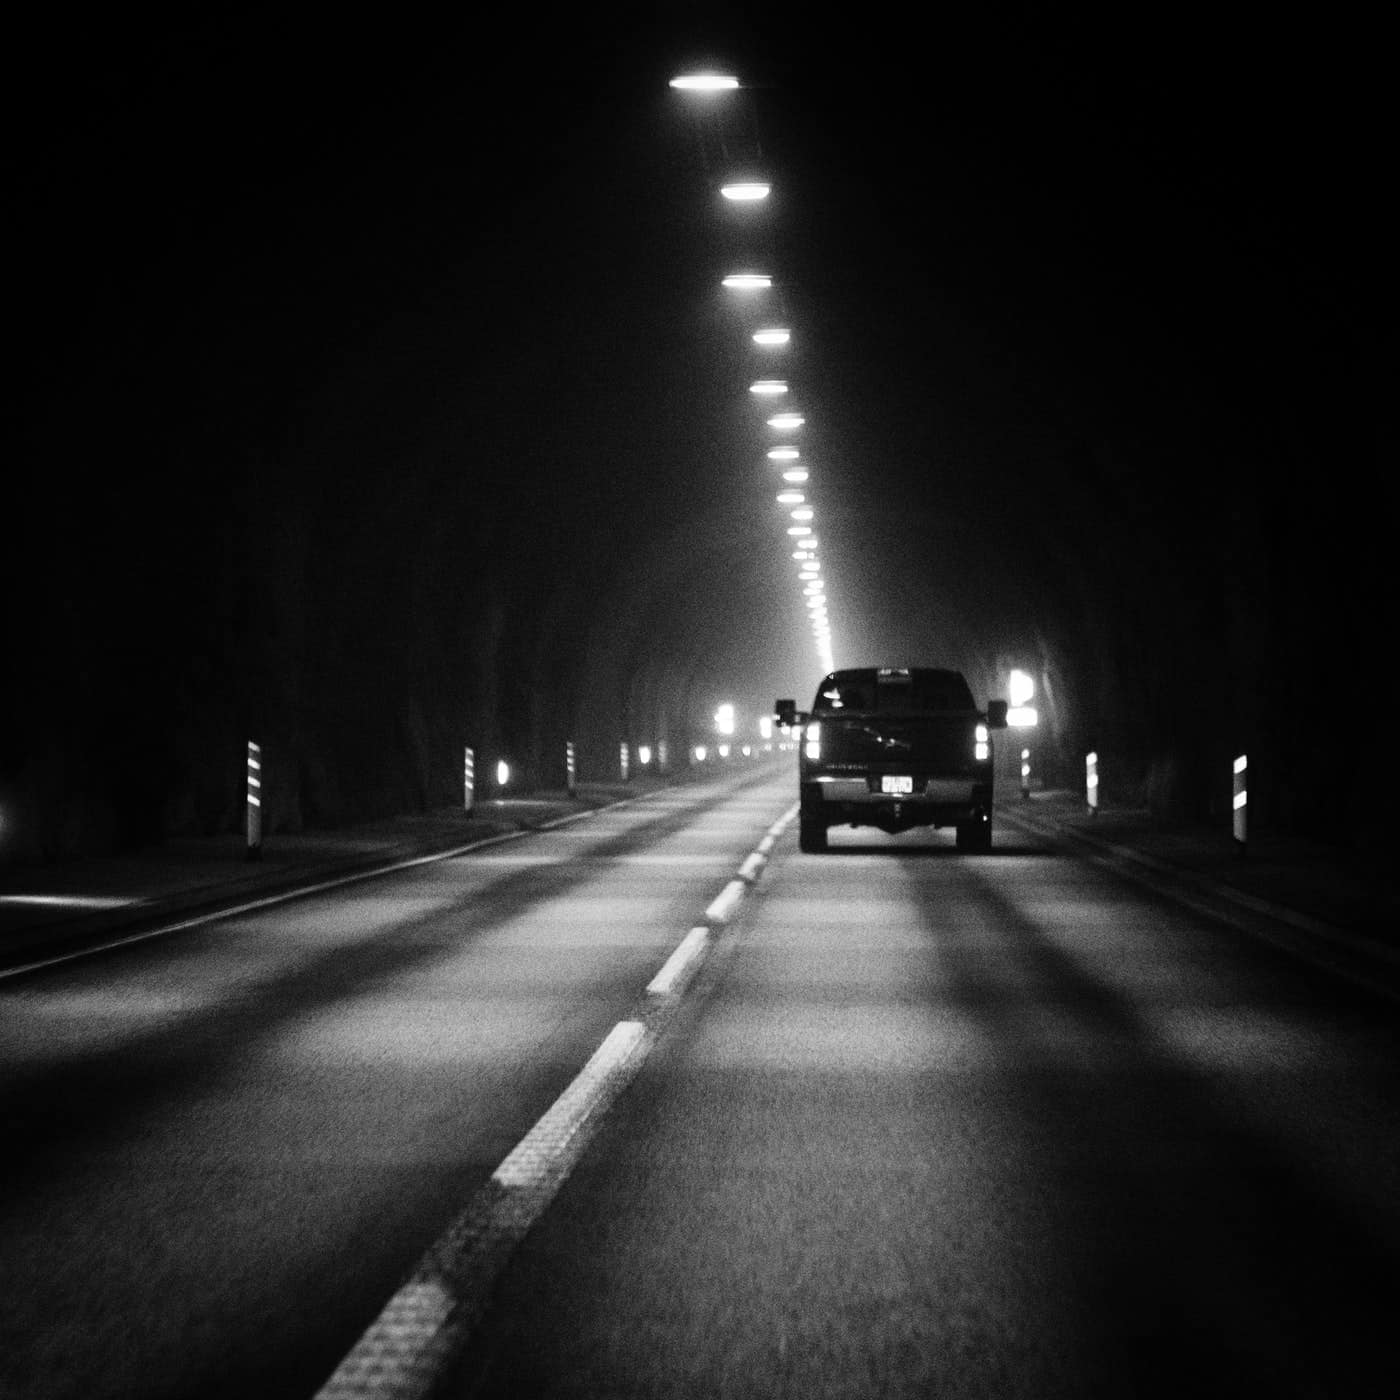 Black and white image of truck driving in a dark tunnel with lights down the middle of the ceiling